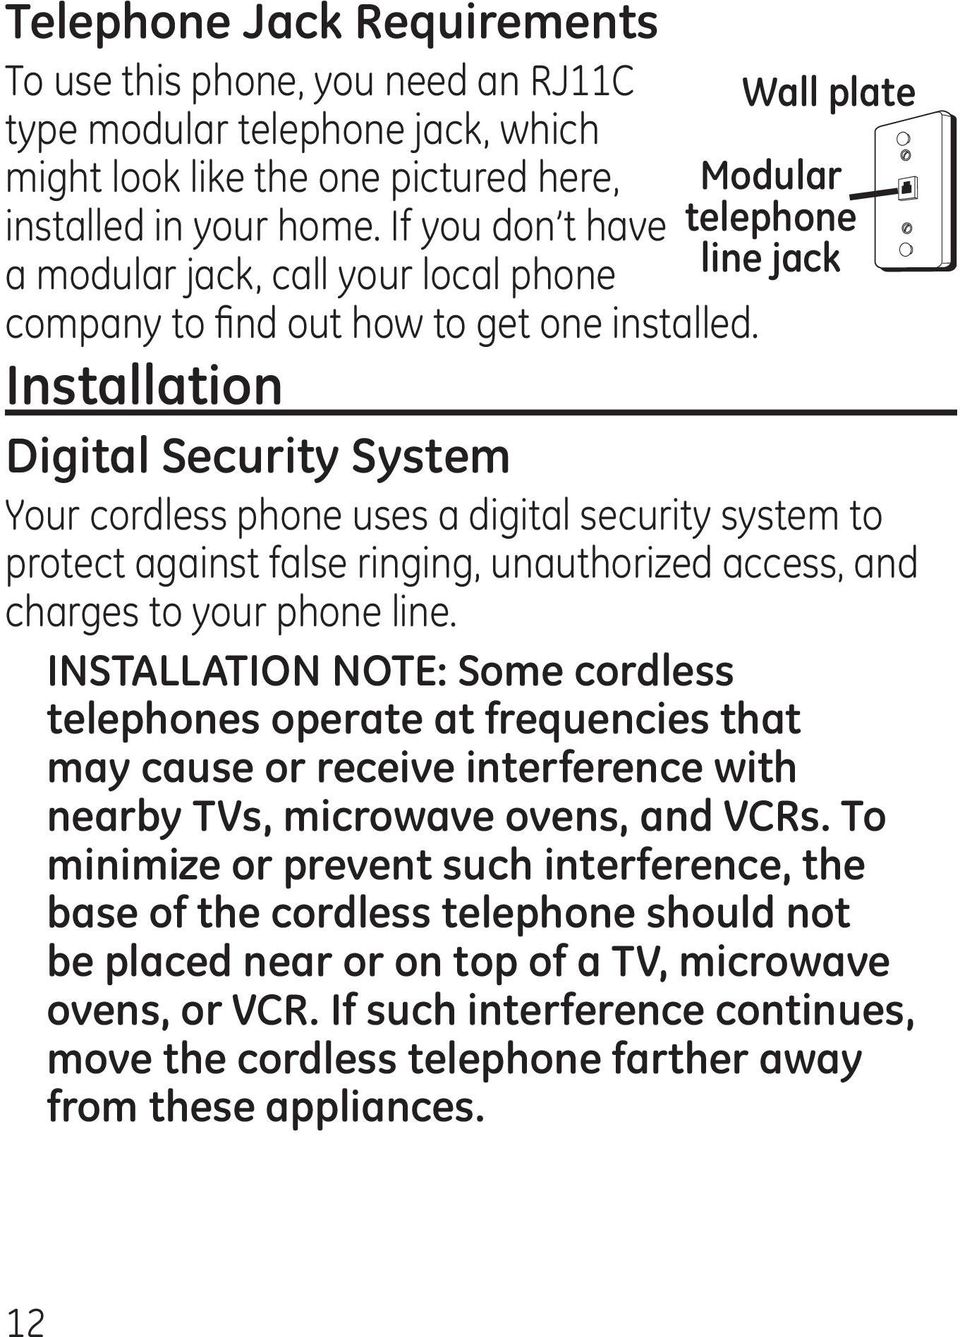 Installation Digital Security System Wall plate Modular telephone line jack Your cordless phone uses a digital security system to protect against false ringing, unauthorized access, and charges to